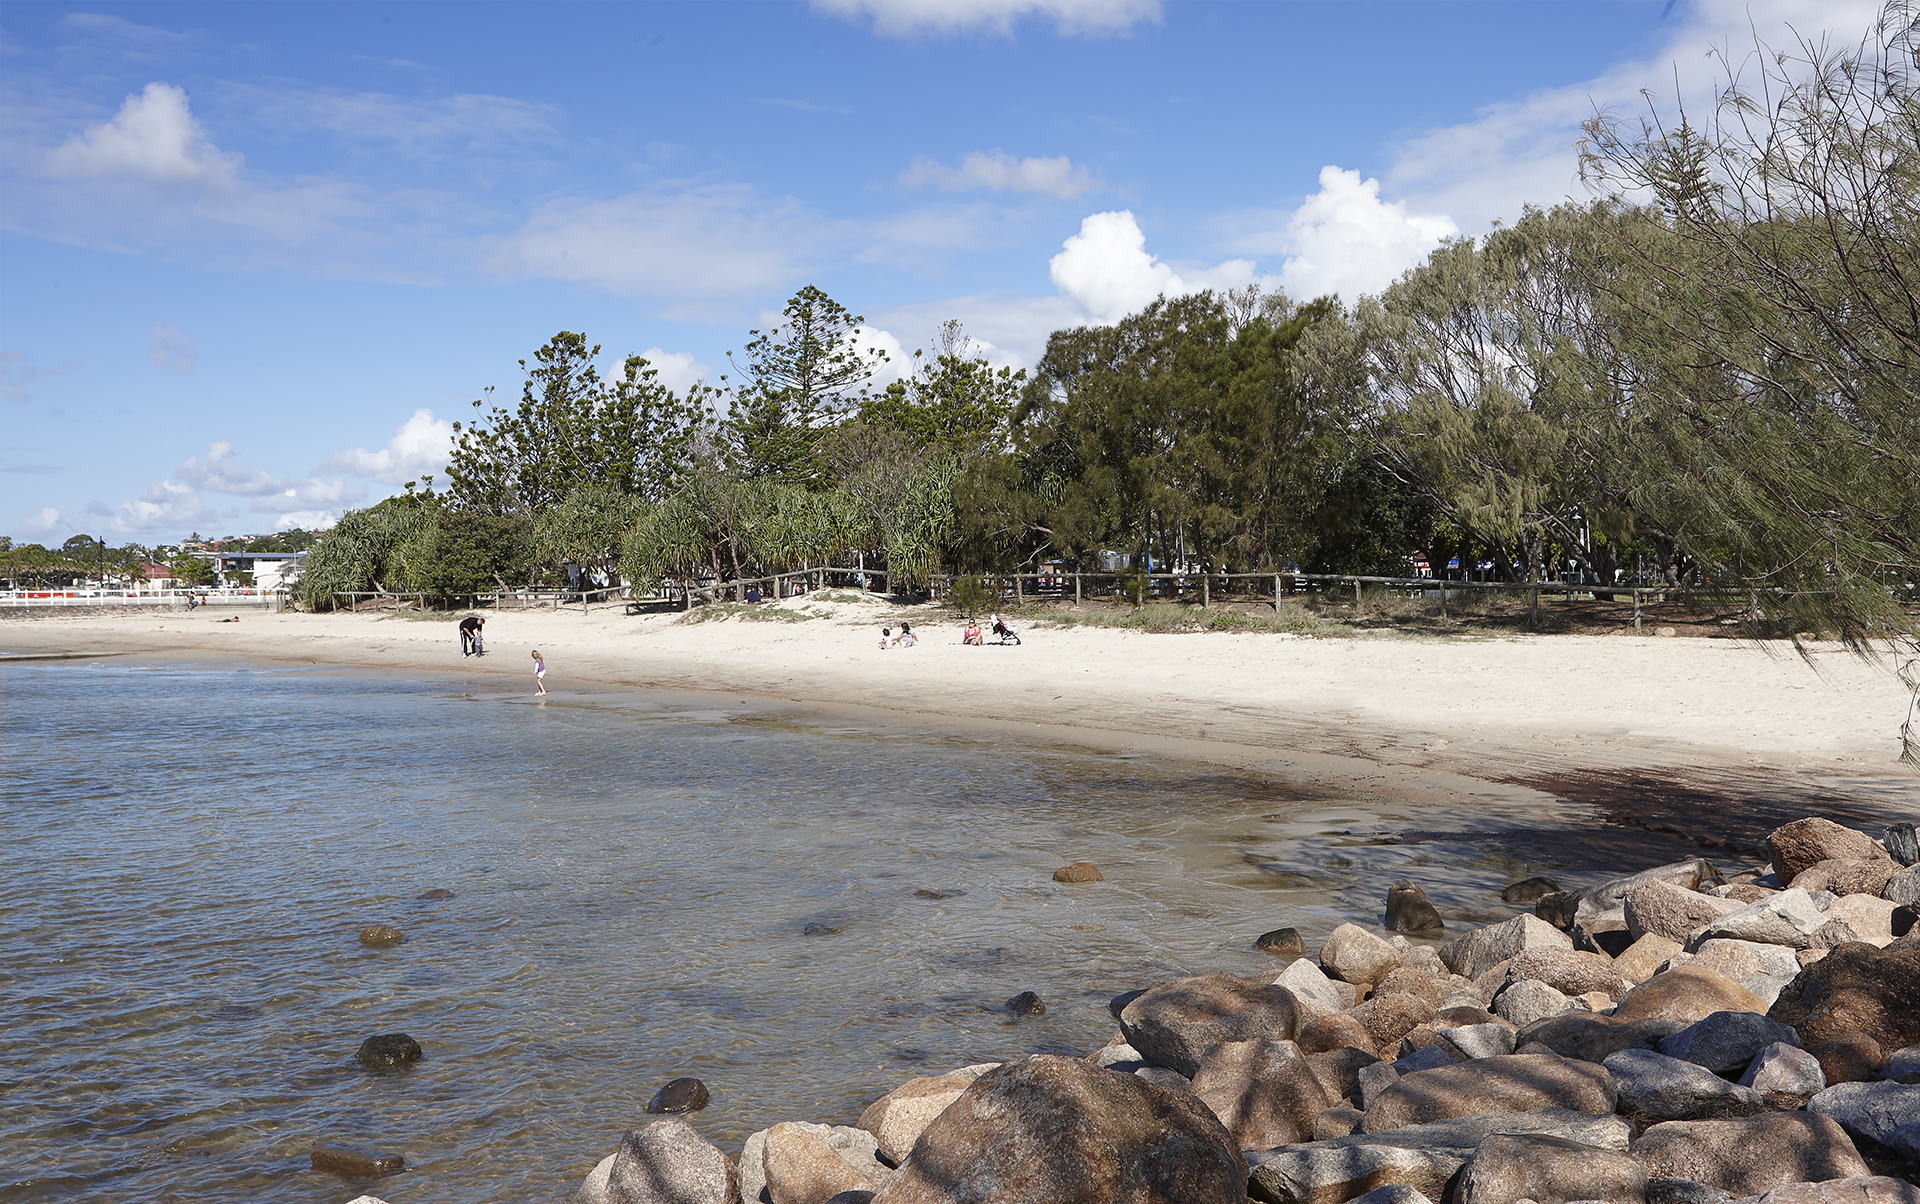 This is an image of the Wynnum foreshore including beach